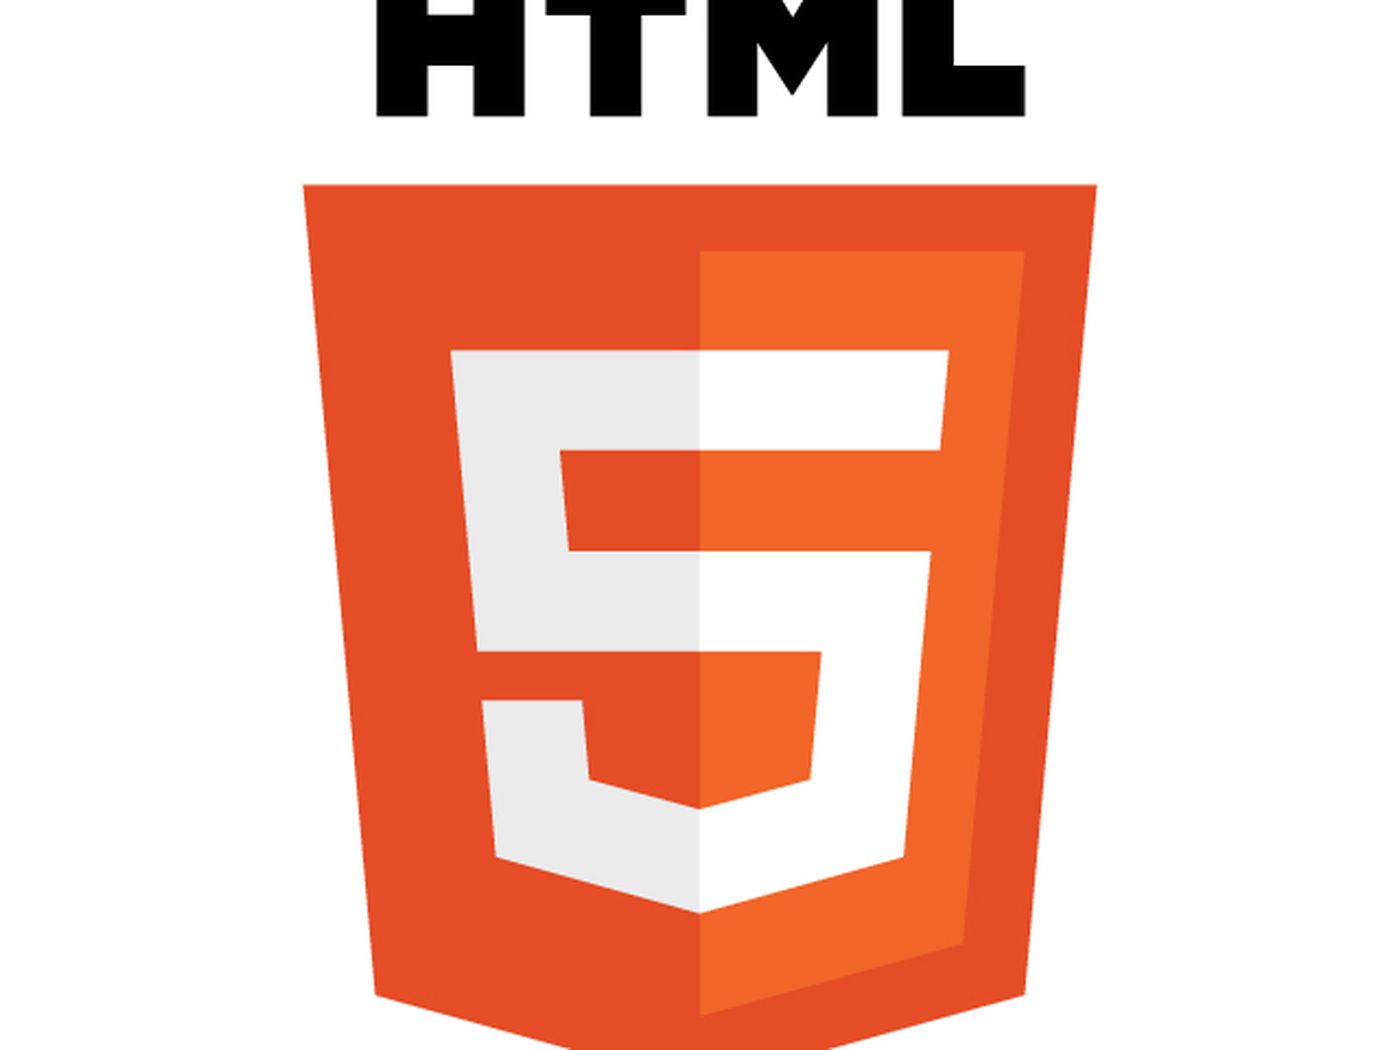 Proposed web standard would allow copy protection on HTML5 video, but is it 'unethical?'